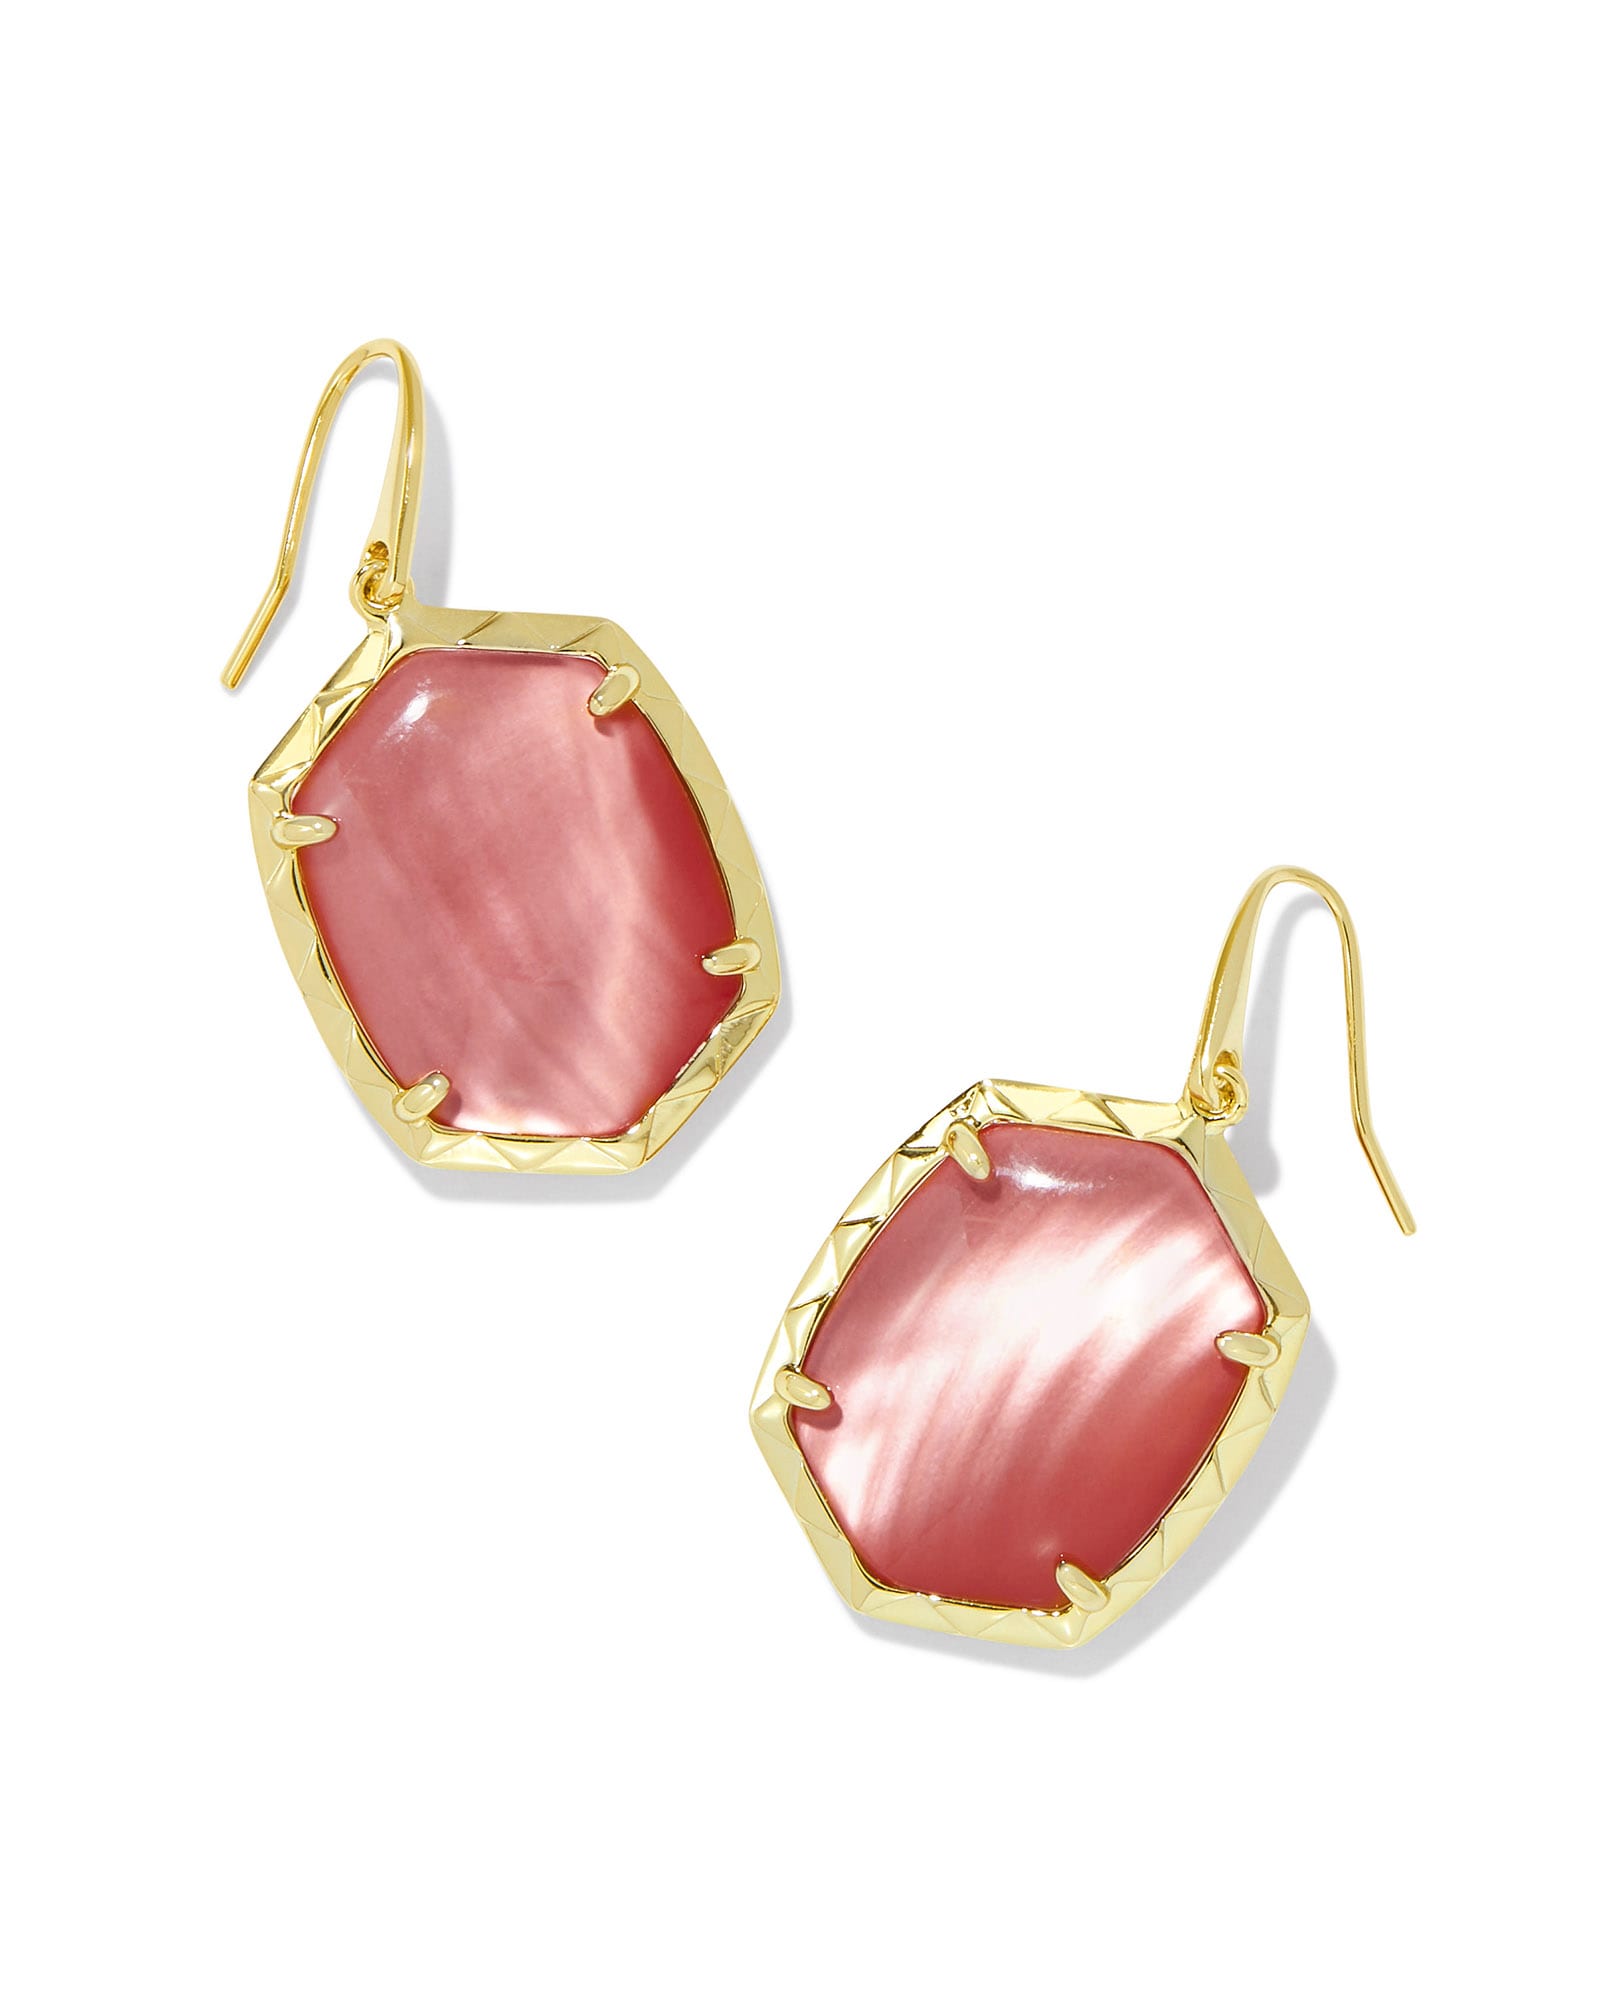 Daphne Gold Drop Earrings in Coral Pink Mother-of-Pearl